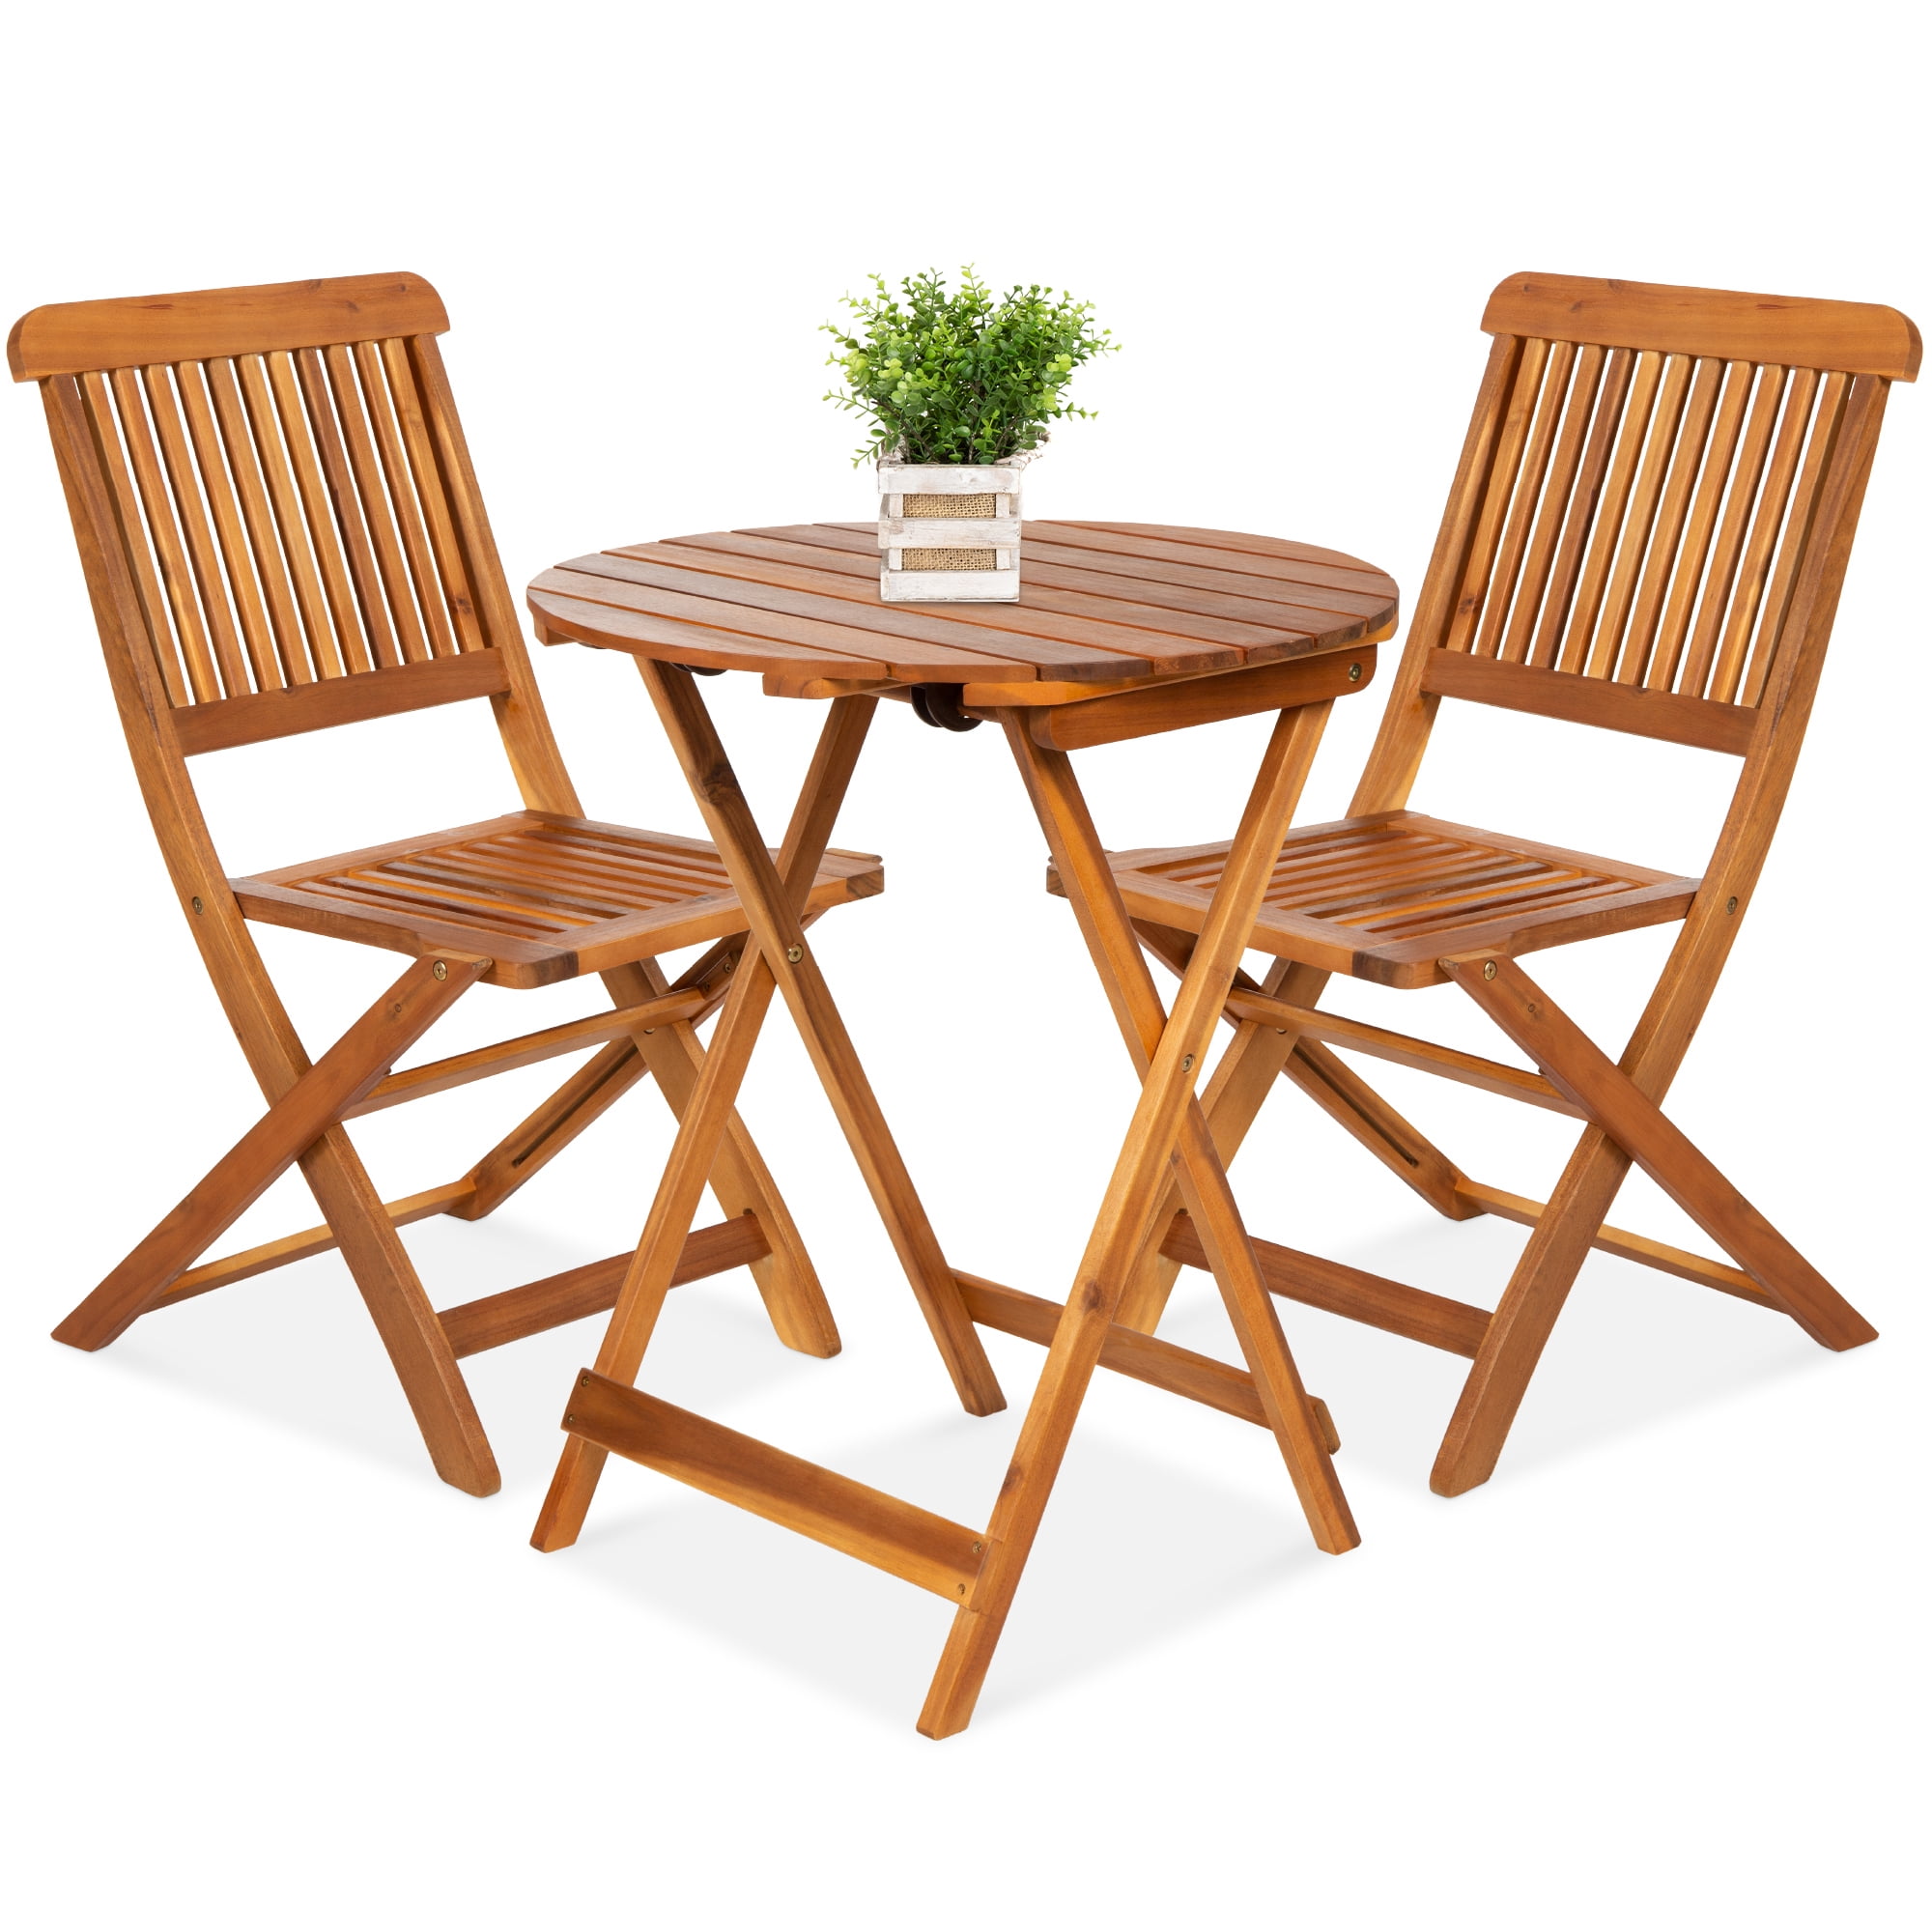 Chairs Table Teak Finish, Small Outdoor Bistro Set With Umbrella